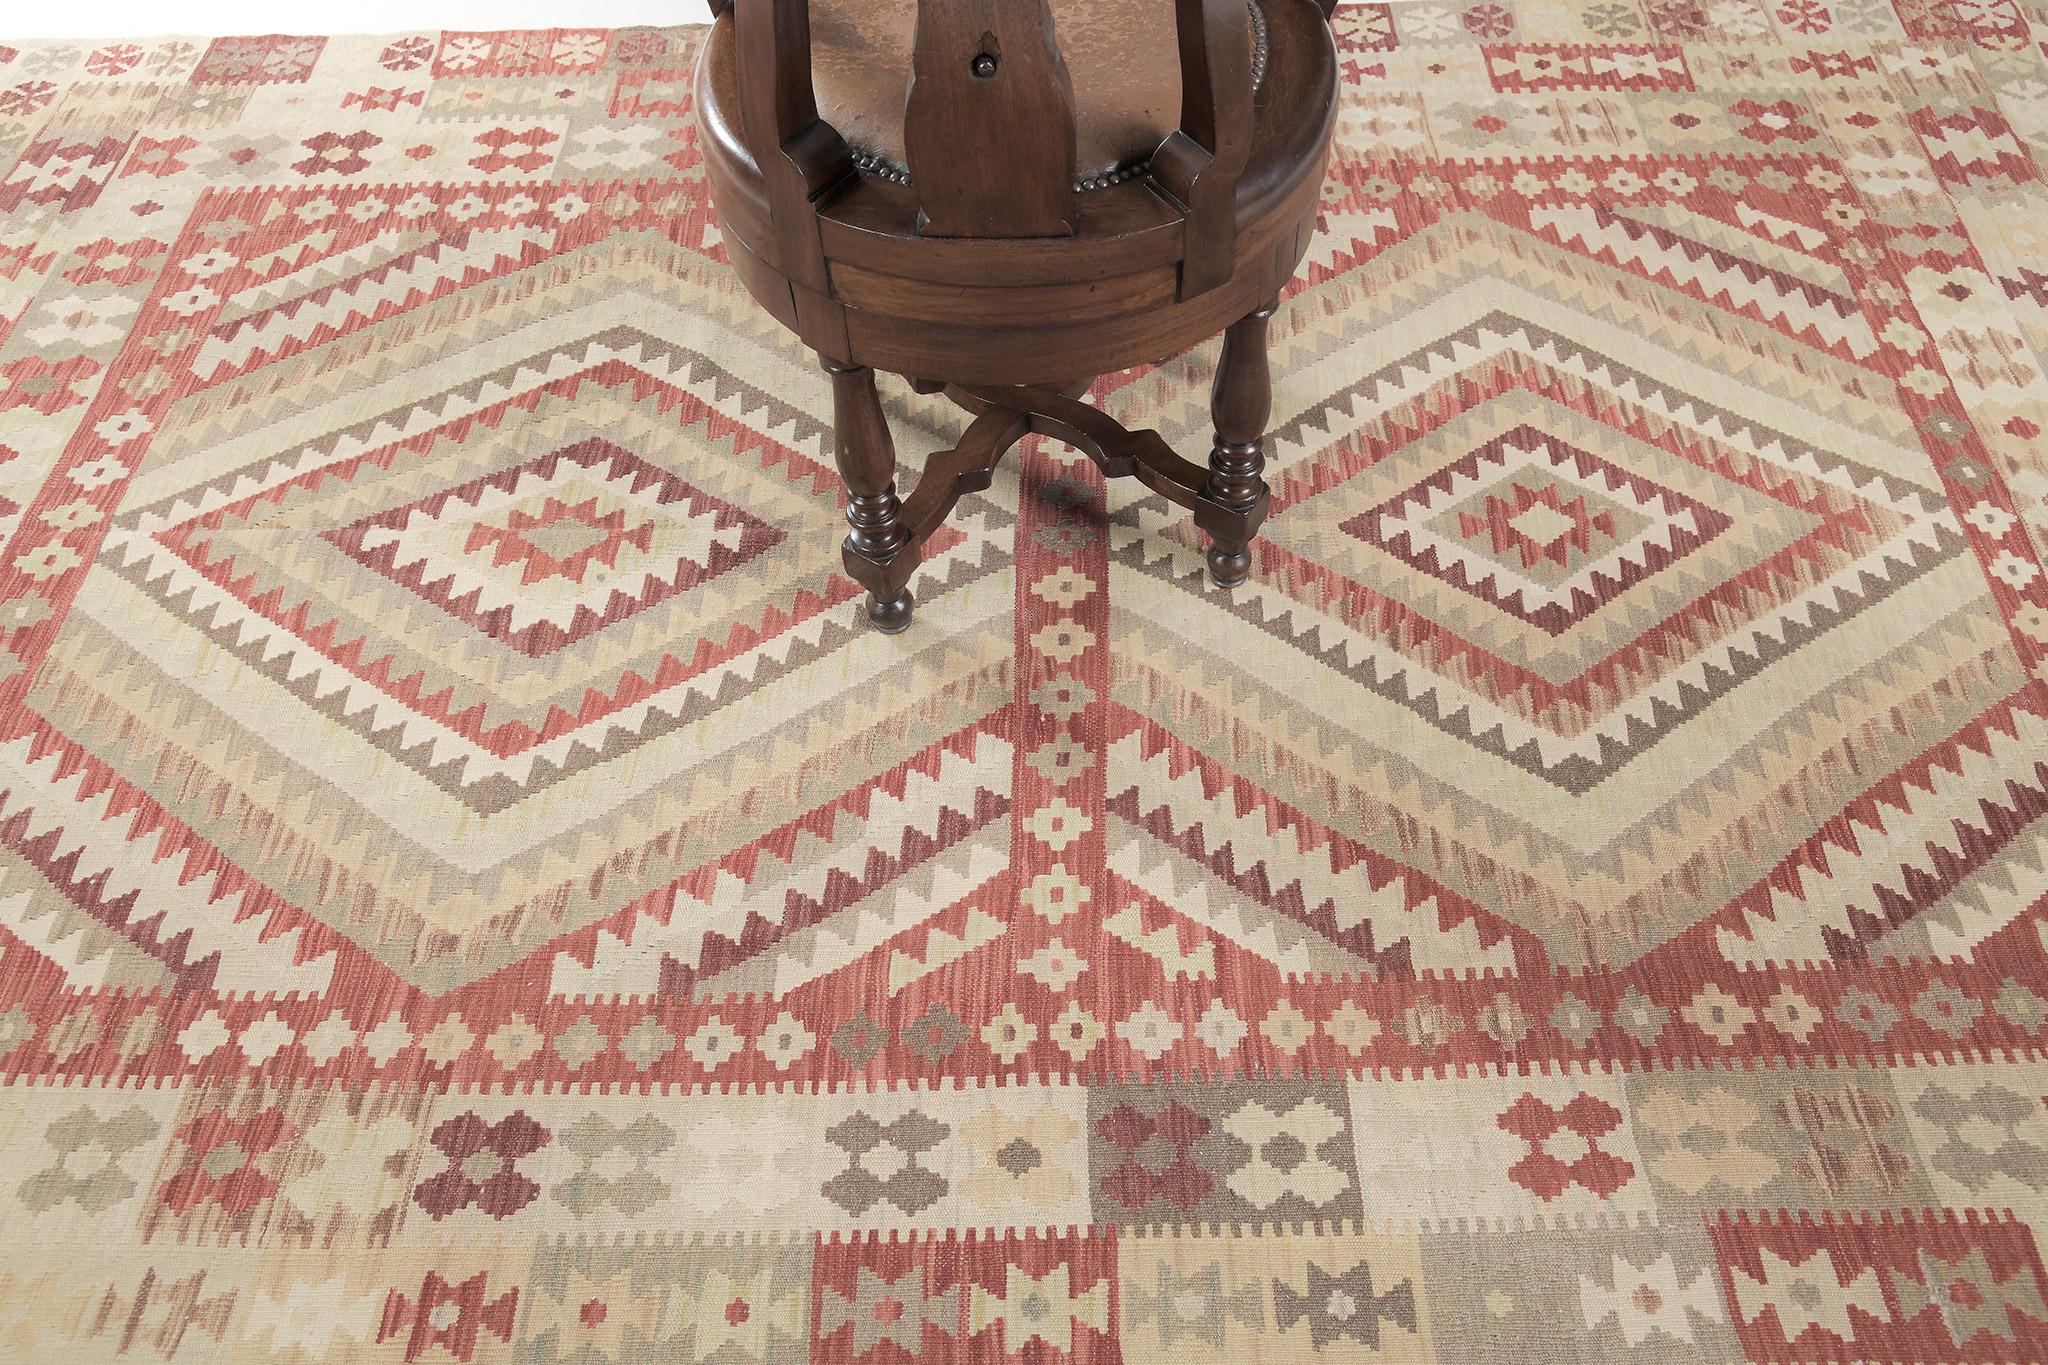 This impressive flatweave kilim features diamond patterns in the mirrored pattern. Surrounded by remarkable motifs and symbolic geometric patterns, this vintage-styled kilim out your room spaces attractive. A masterpiece that is a must-have in your